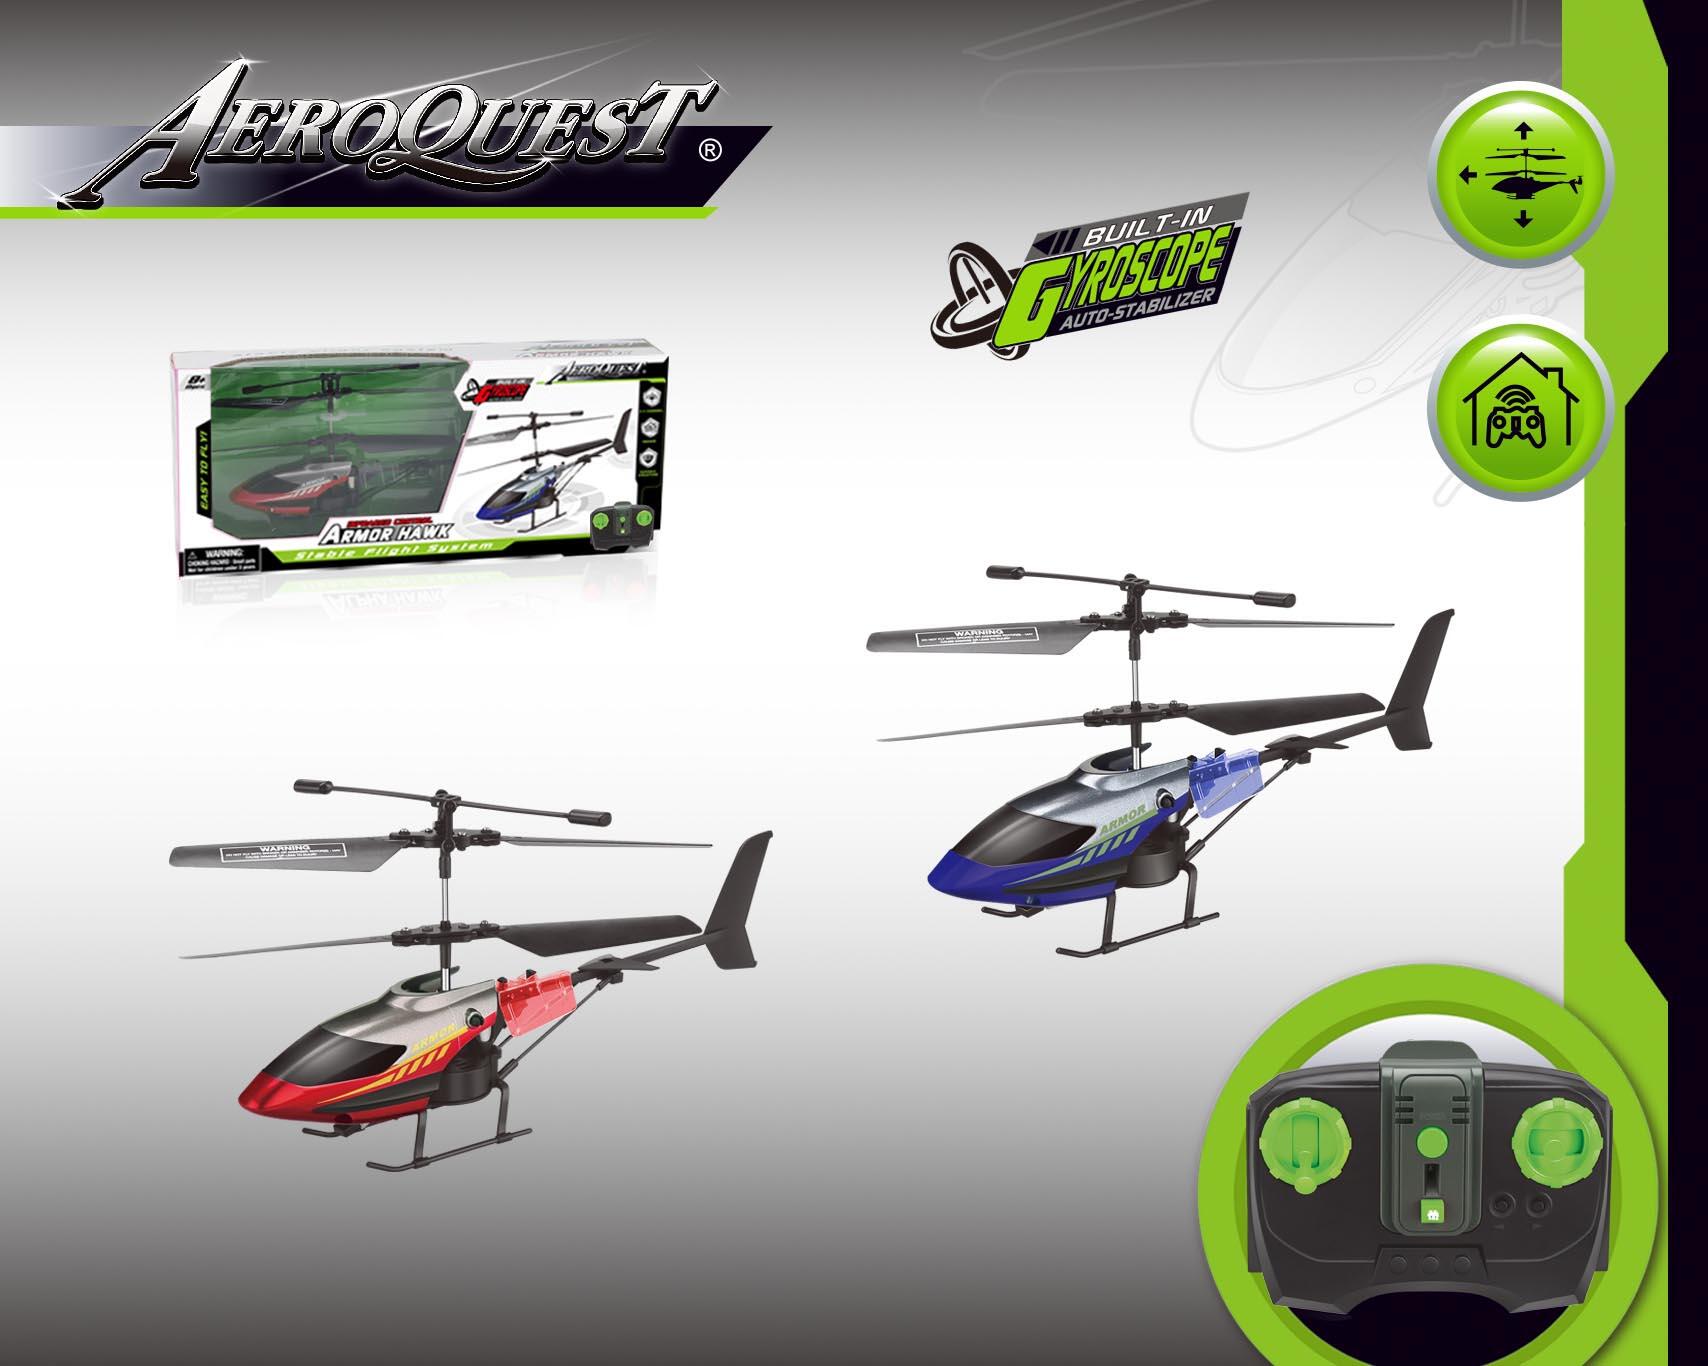 2CH I/R HELICOPTER WITH GYROSCOPE